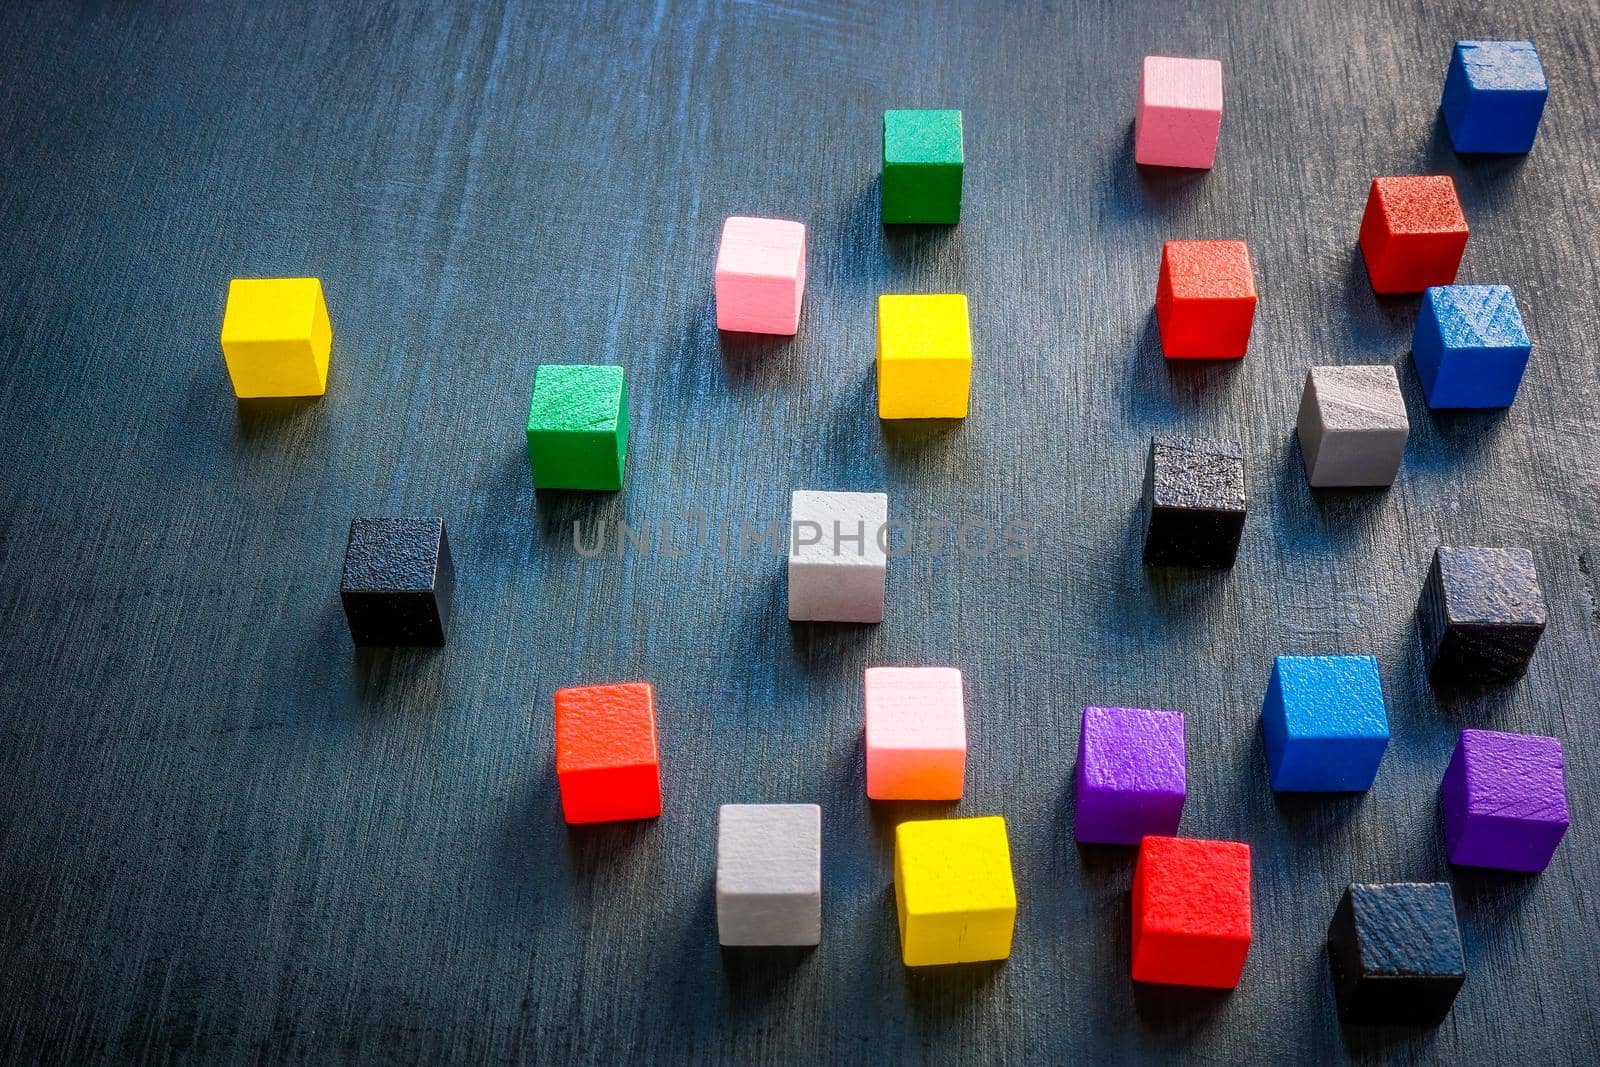 Colored cubes on dark surface. Leadership concept.